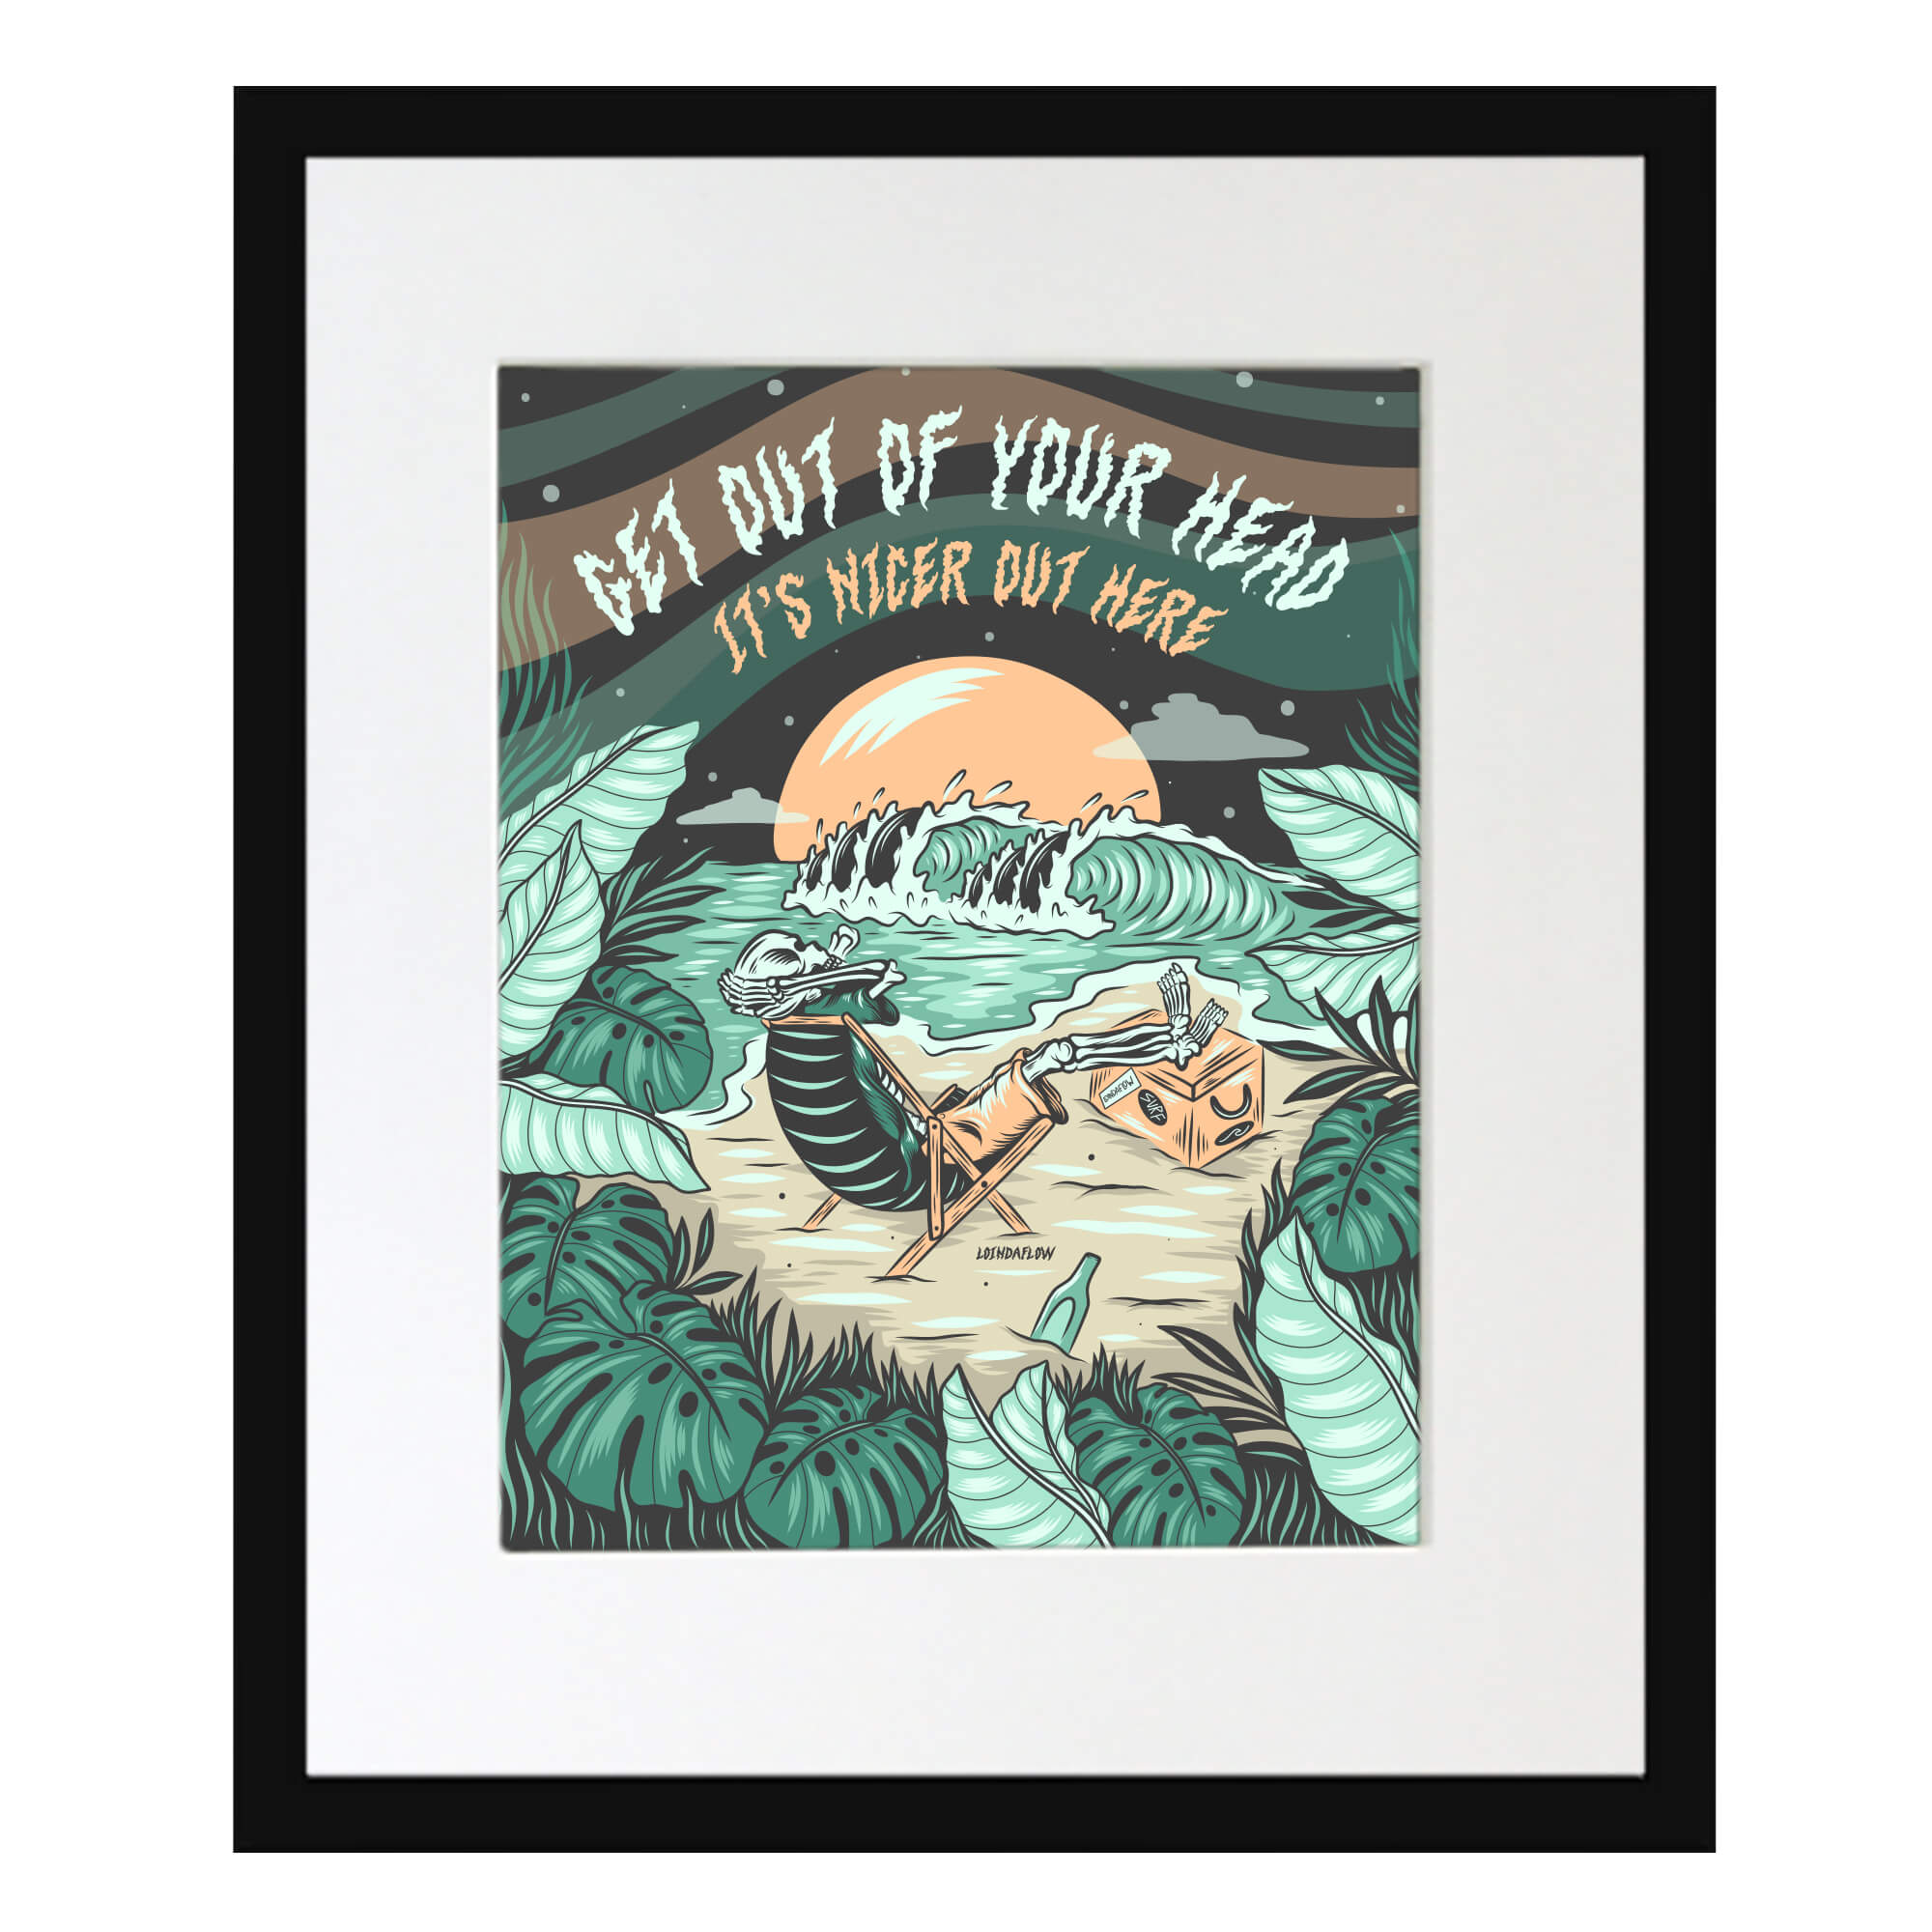 Matted art print with black frame of a skeleton surrounded by tropical plants by hawaii artist Laihha Organna